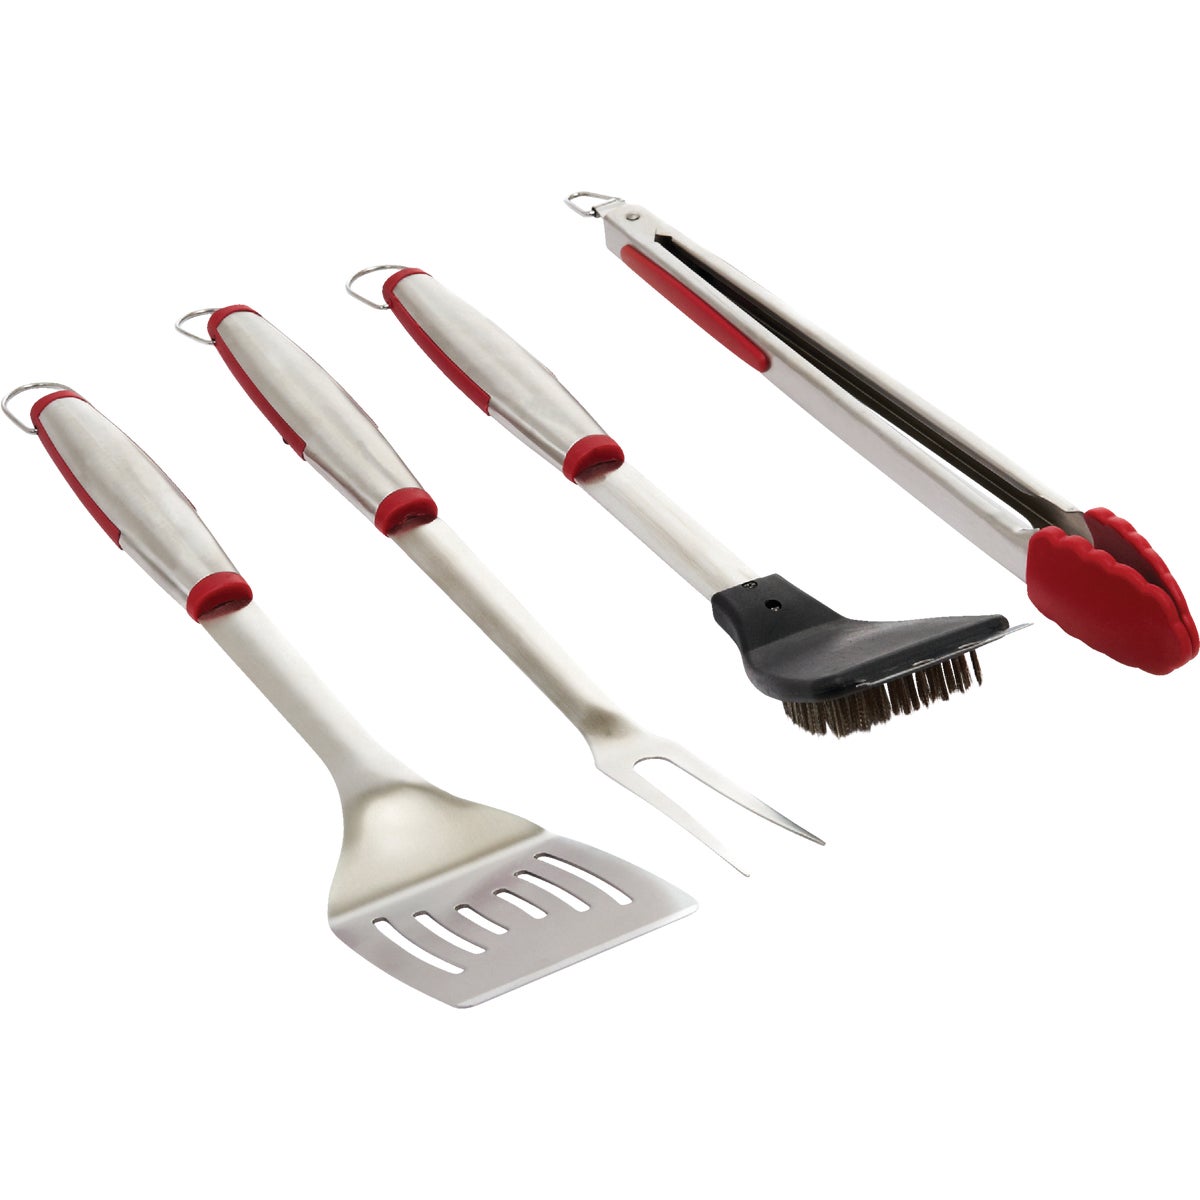 Item 800091, 4-piece set includes turner, tong, fork, and grill brush with stainless 